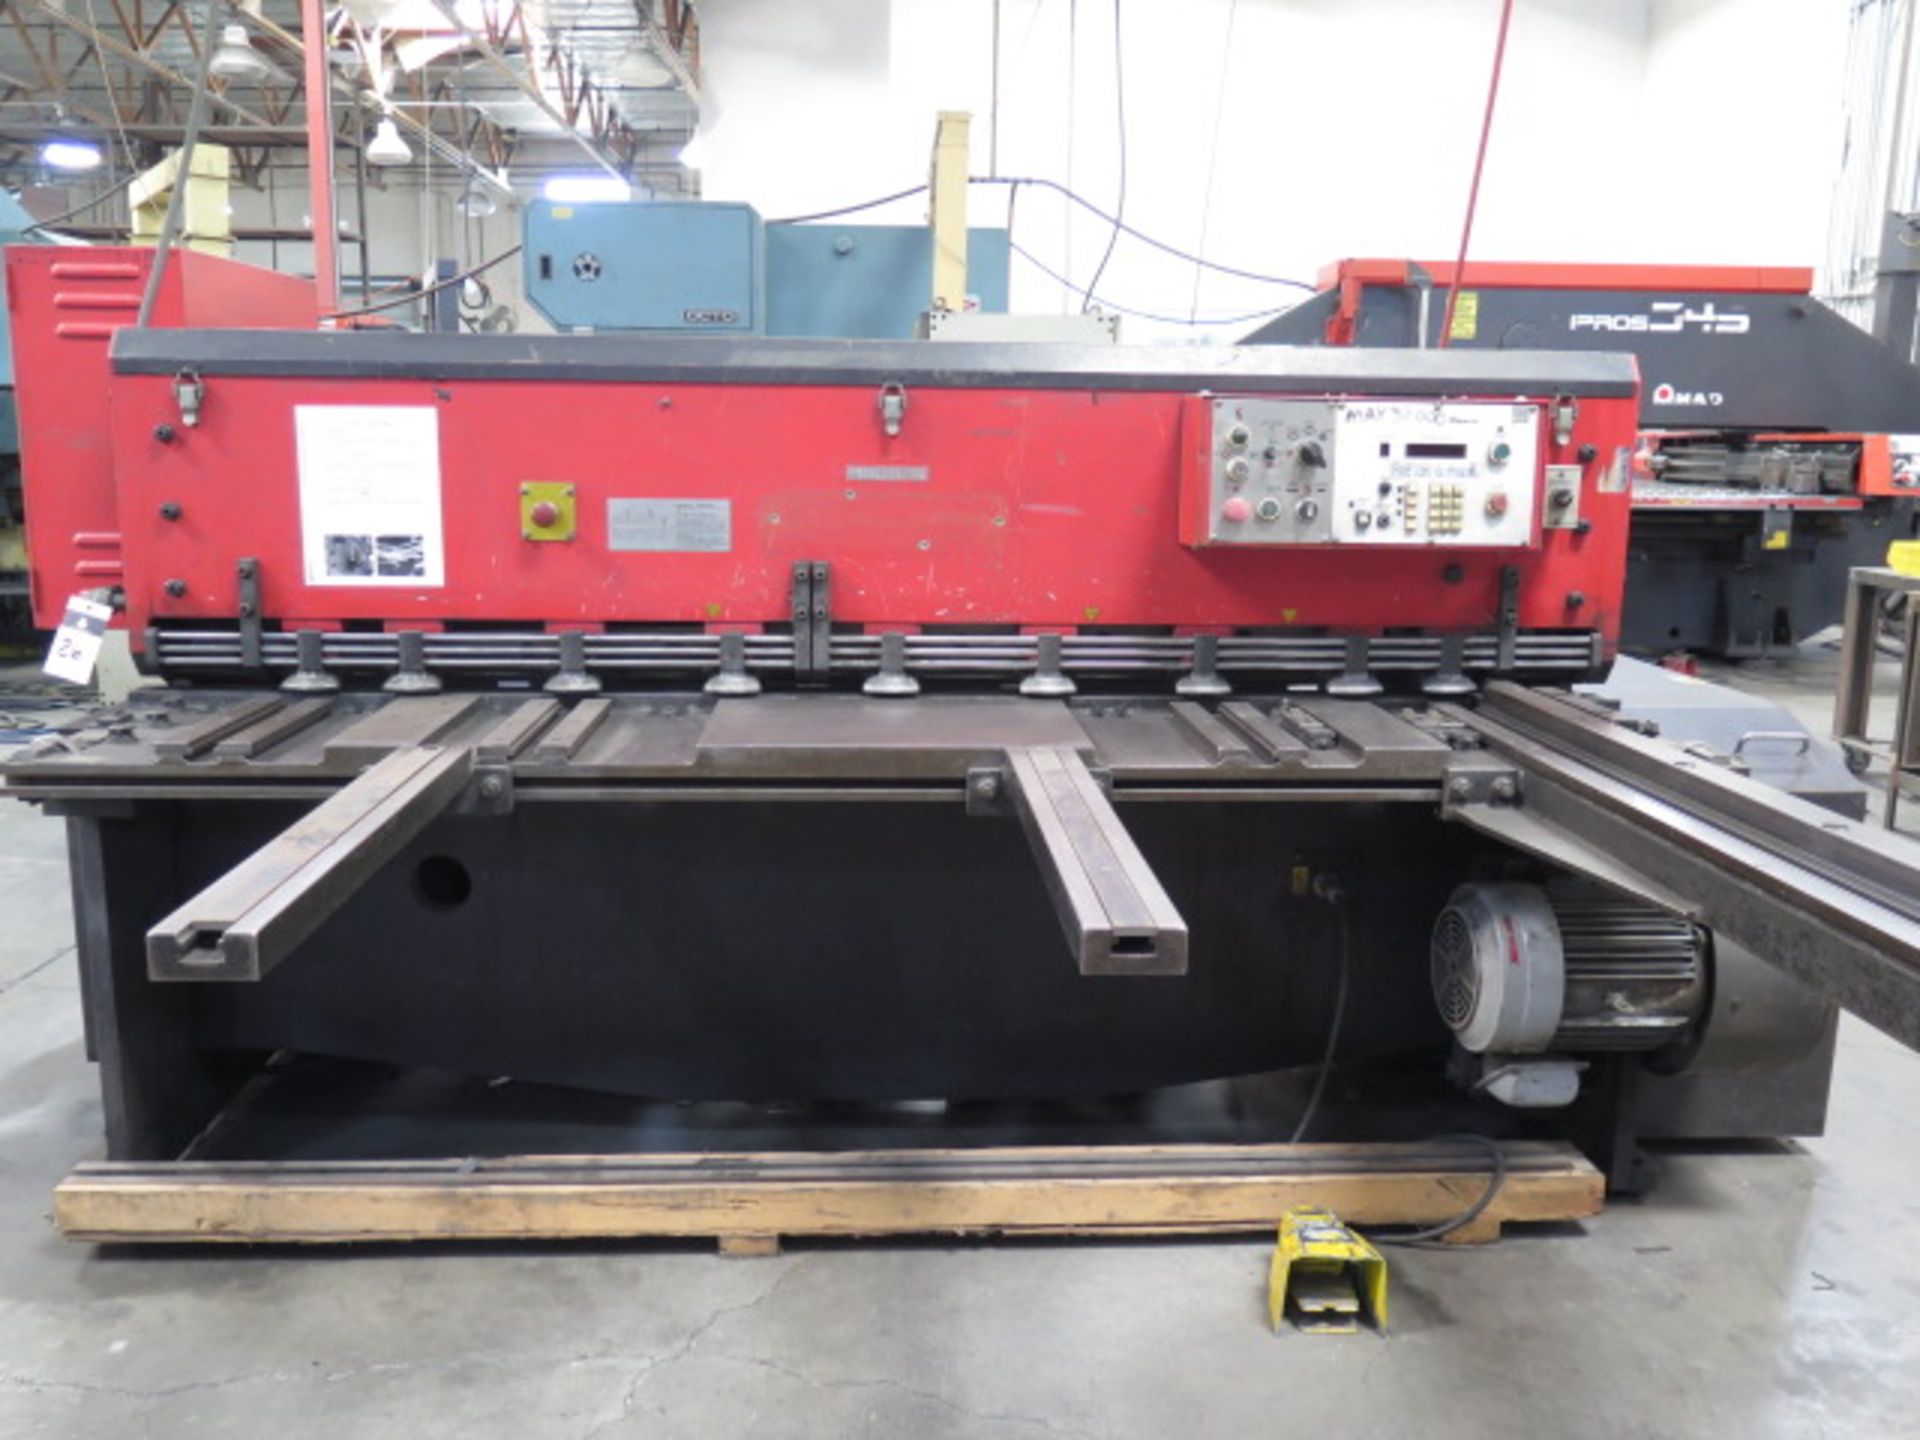 Amada M-2060 ¼” x 78” Power Shear s/n 20600686 w/ Amada Controls and Back Gauging, SOLD AS IS - Image 2 of 14